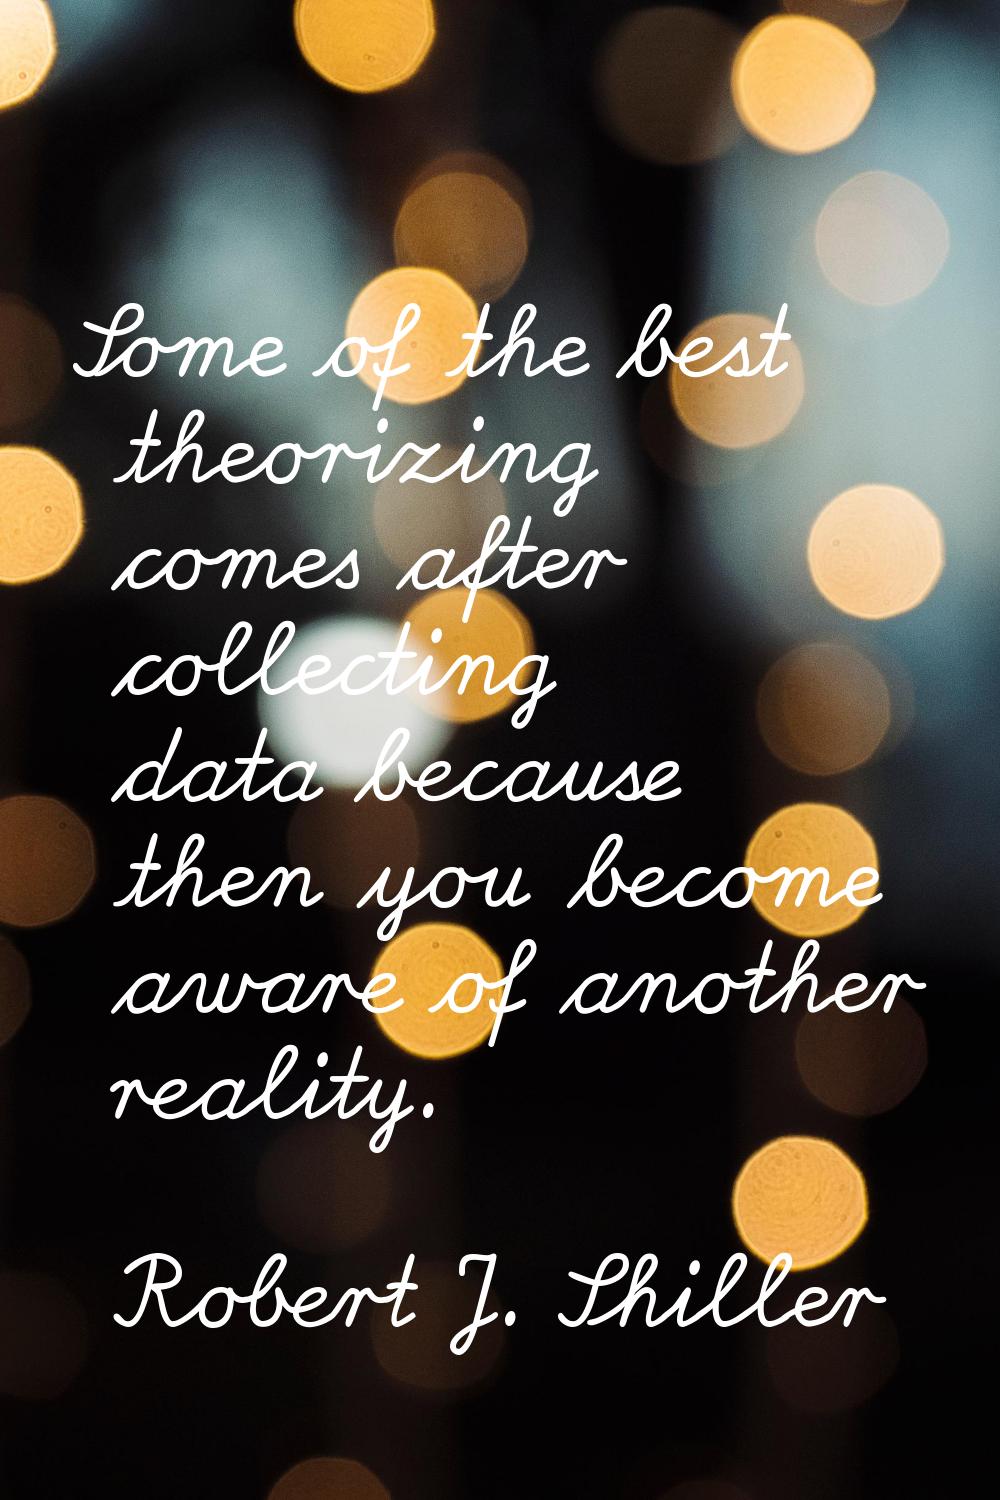 Some of the best theorizing comes after collecting data because then you become aware of another re